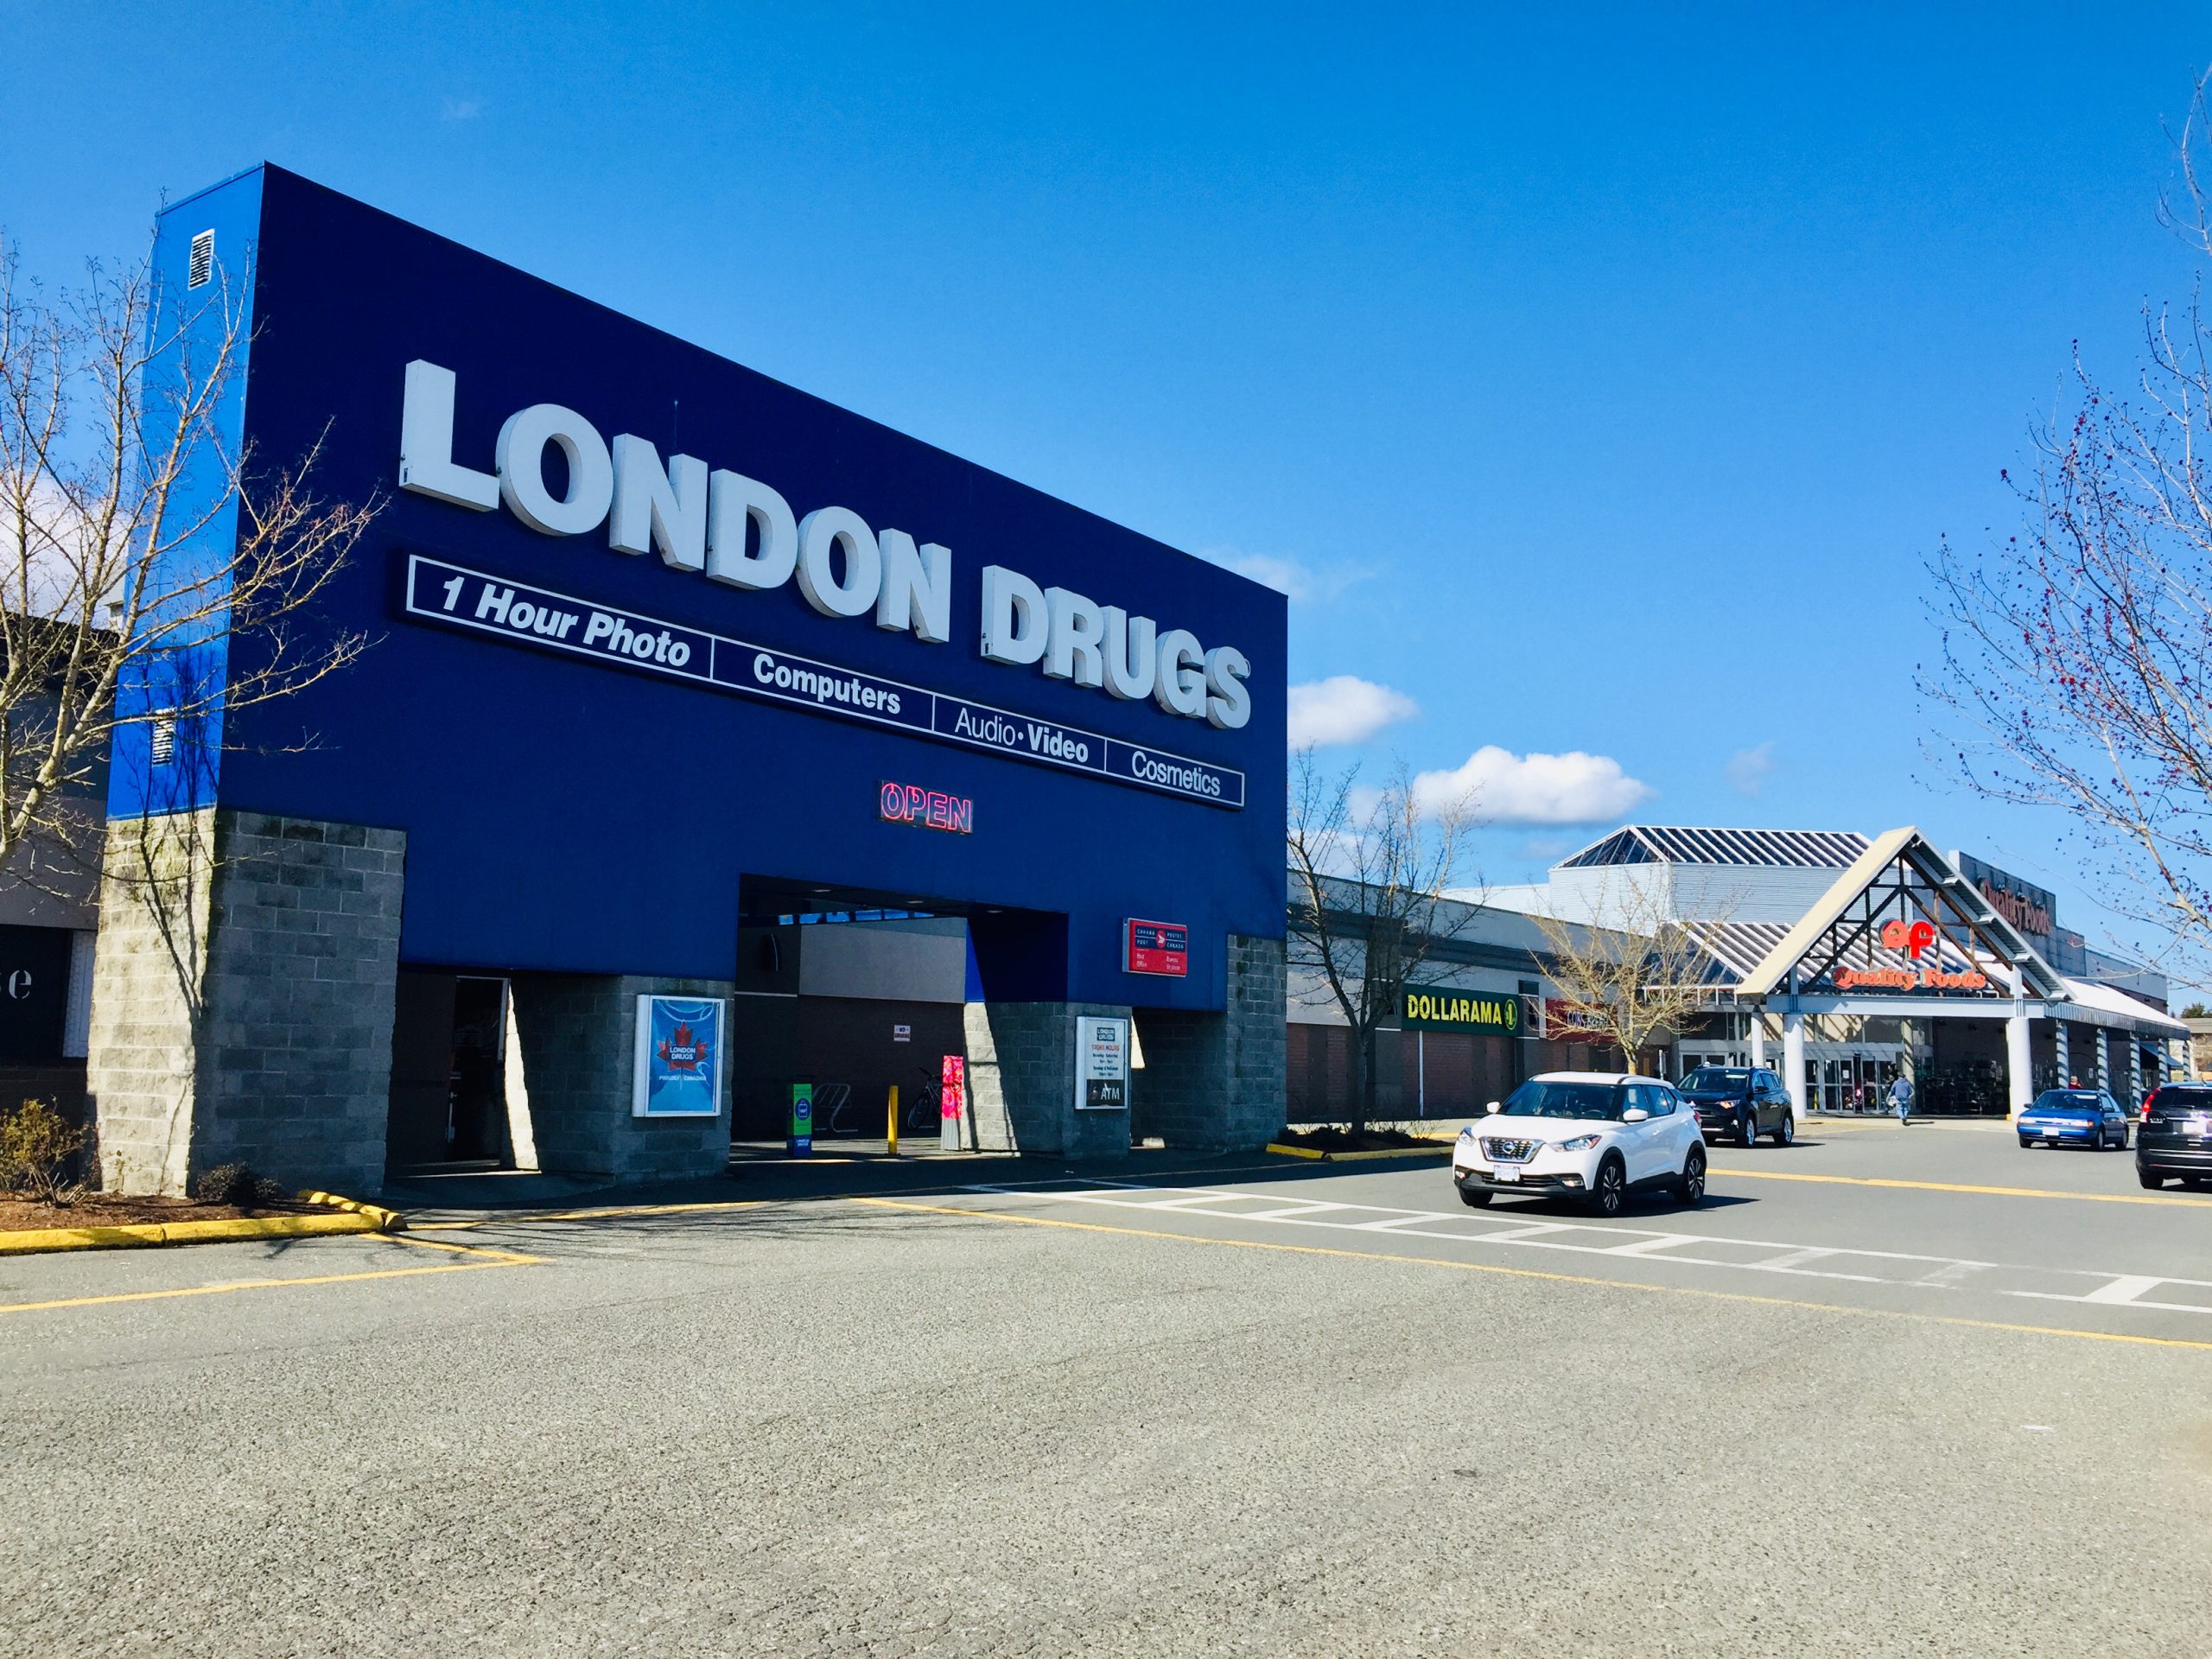 London Drugs steps up to support small businesses - My Powell